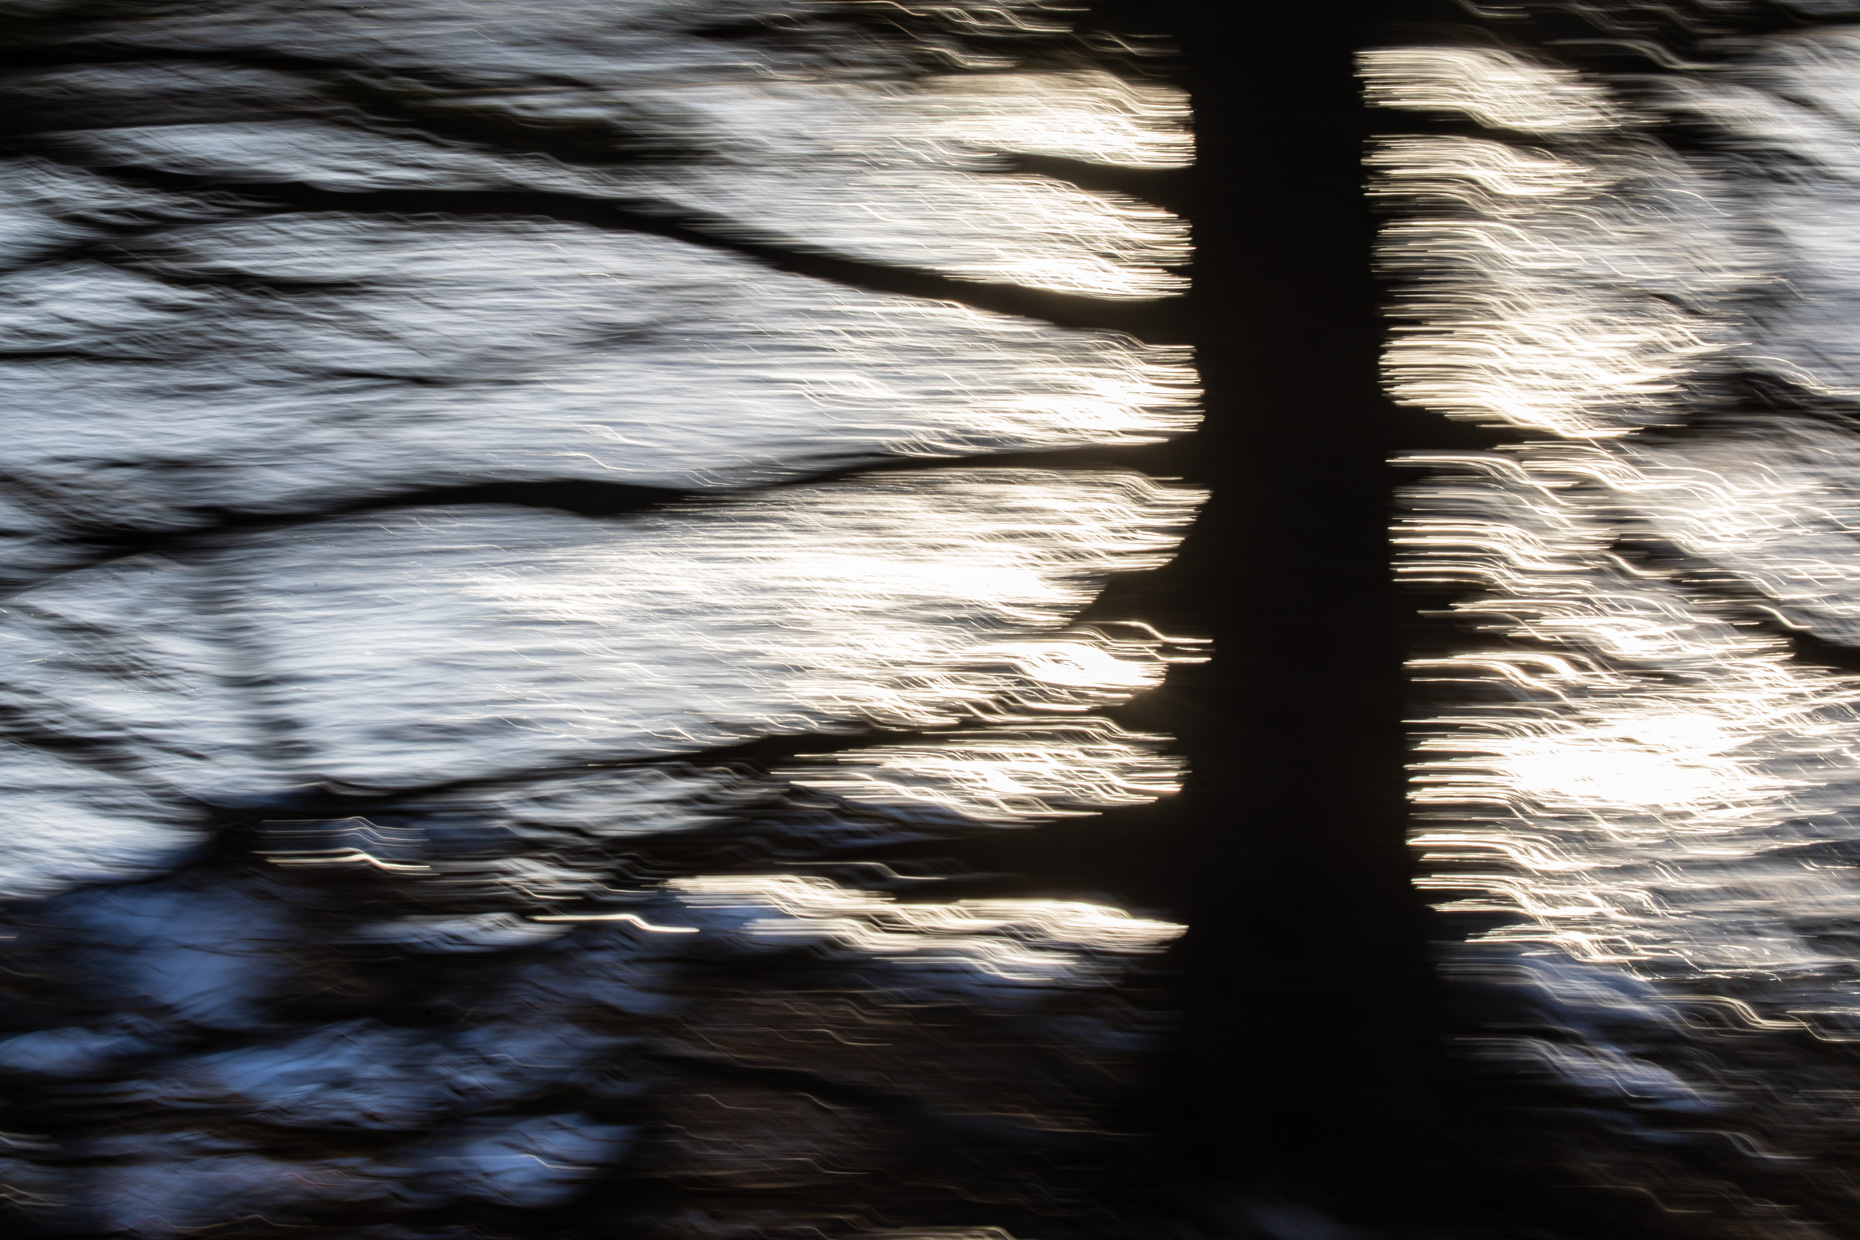 climate_change_winter_ice_Saint_Lawrence_River_Quebec_ICM_intentional_camera_movement-11